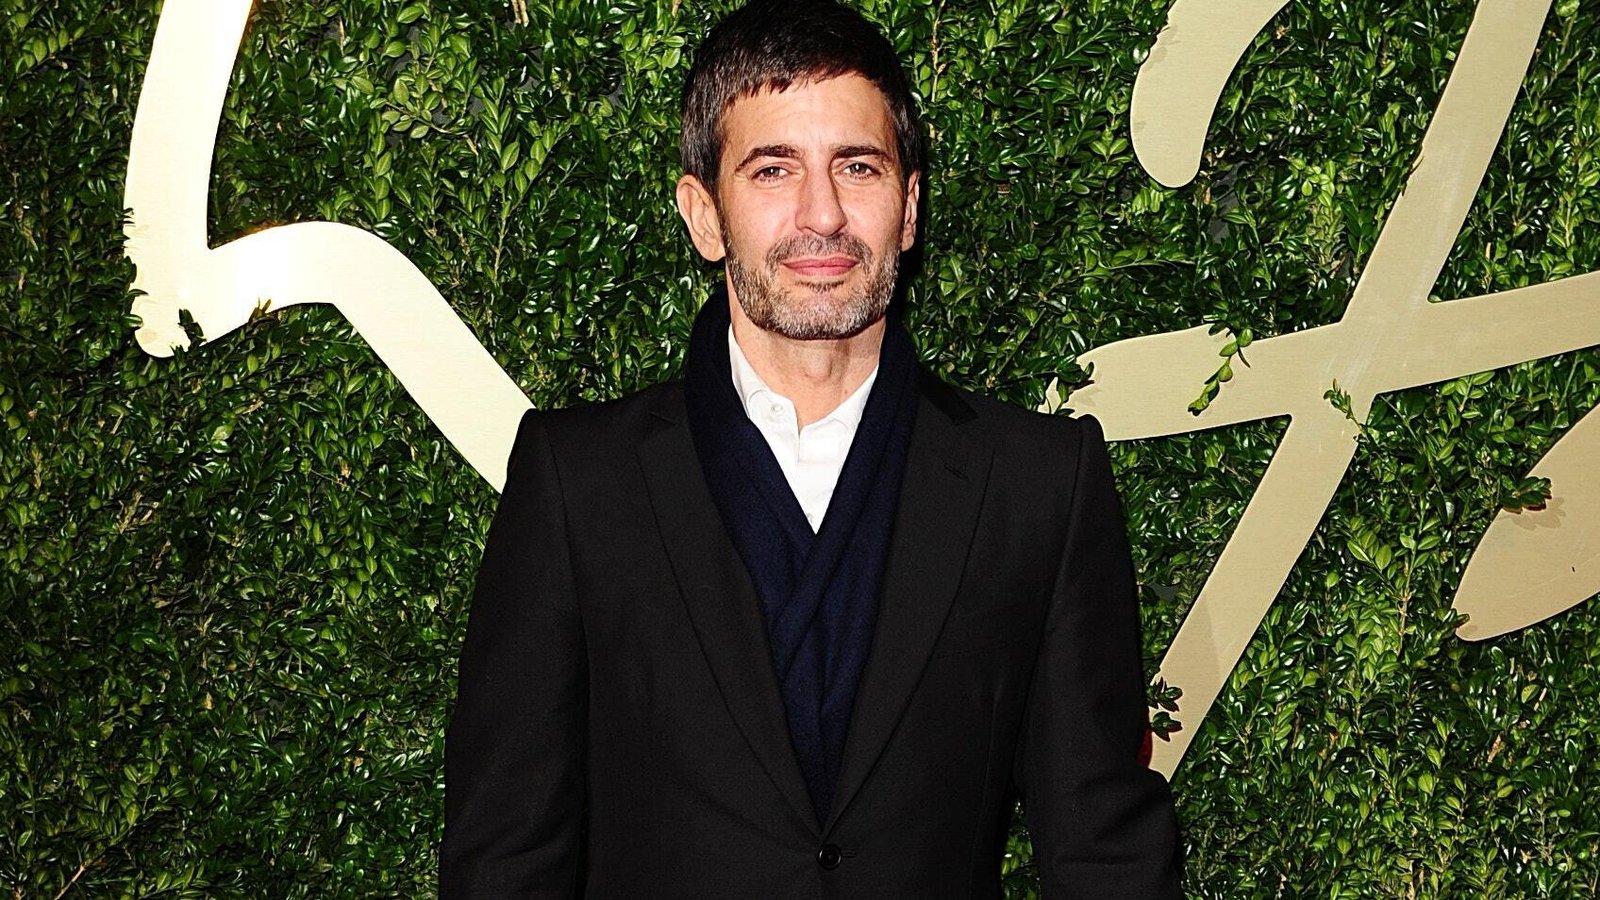 Marc Jacobs Marries Char Defrancesco in a Glamorous NYC Wedding